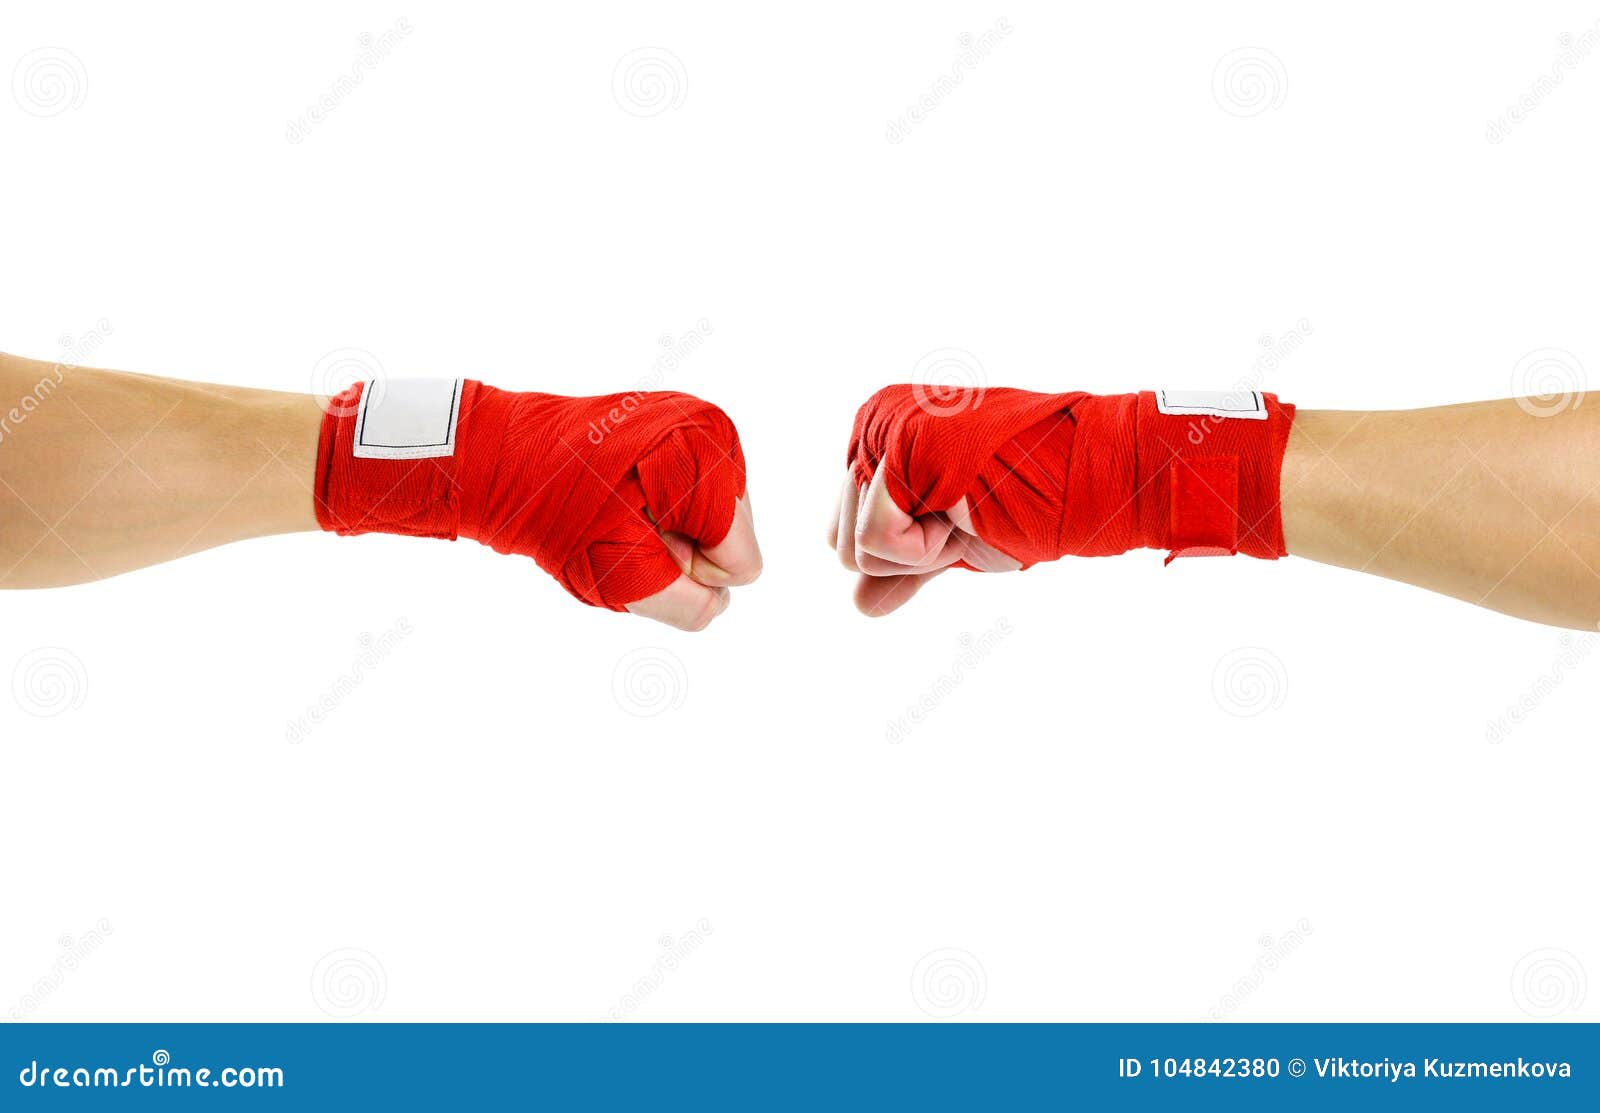 Hand in Red Boxing Bandages. Fist To Fist. Two Fists in Red Boxing